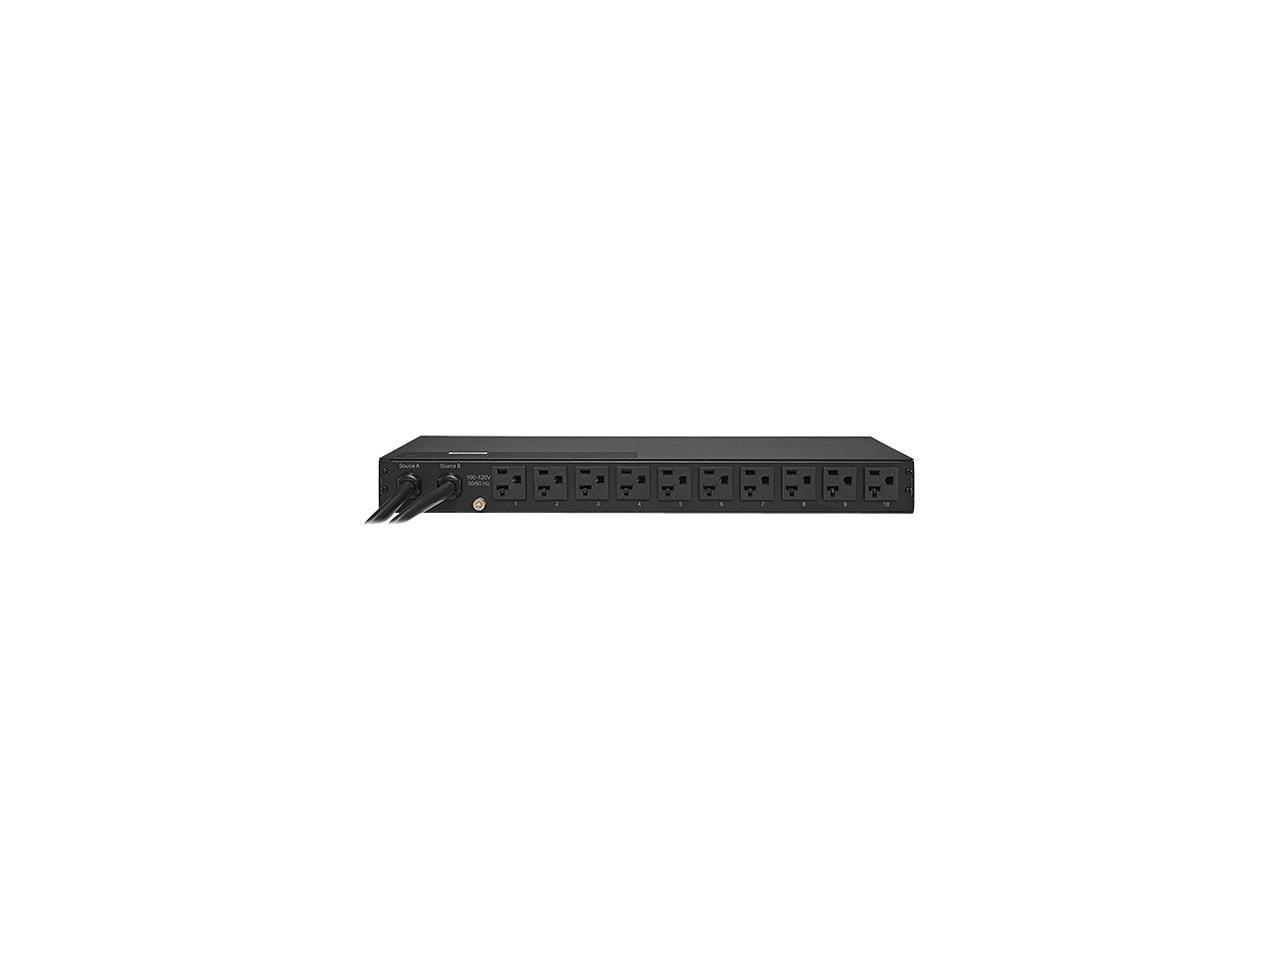 CyberPower PDU20M10AT Metered ATS PDU 120V 20A 1U 10-Outlets (2) 5-20P